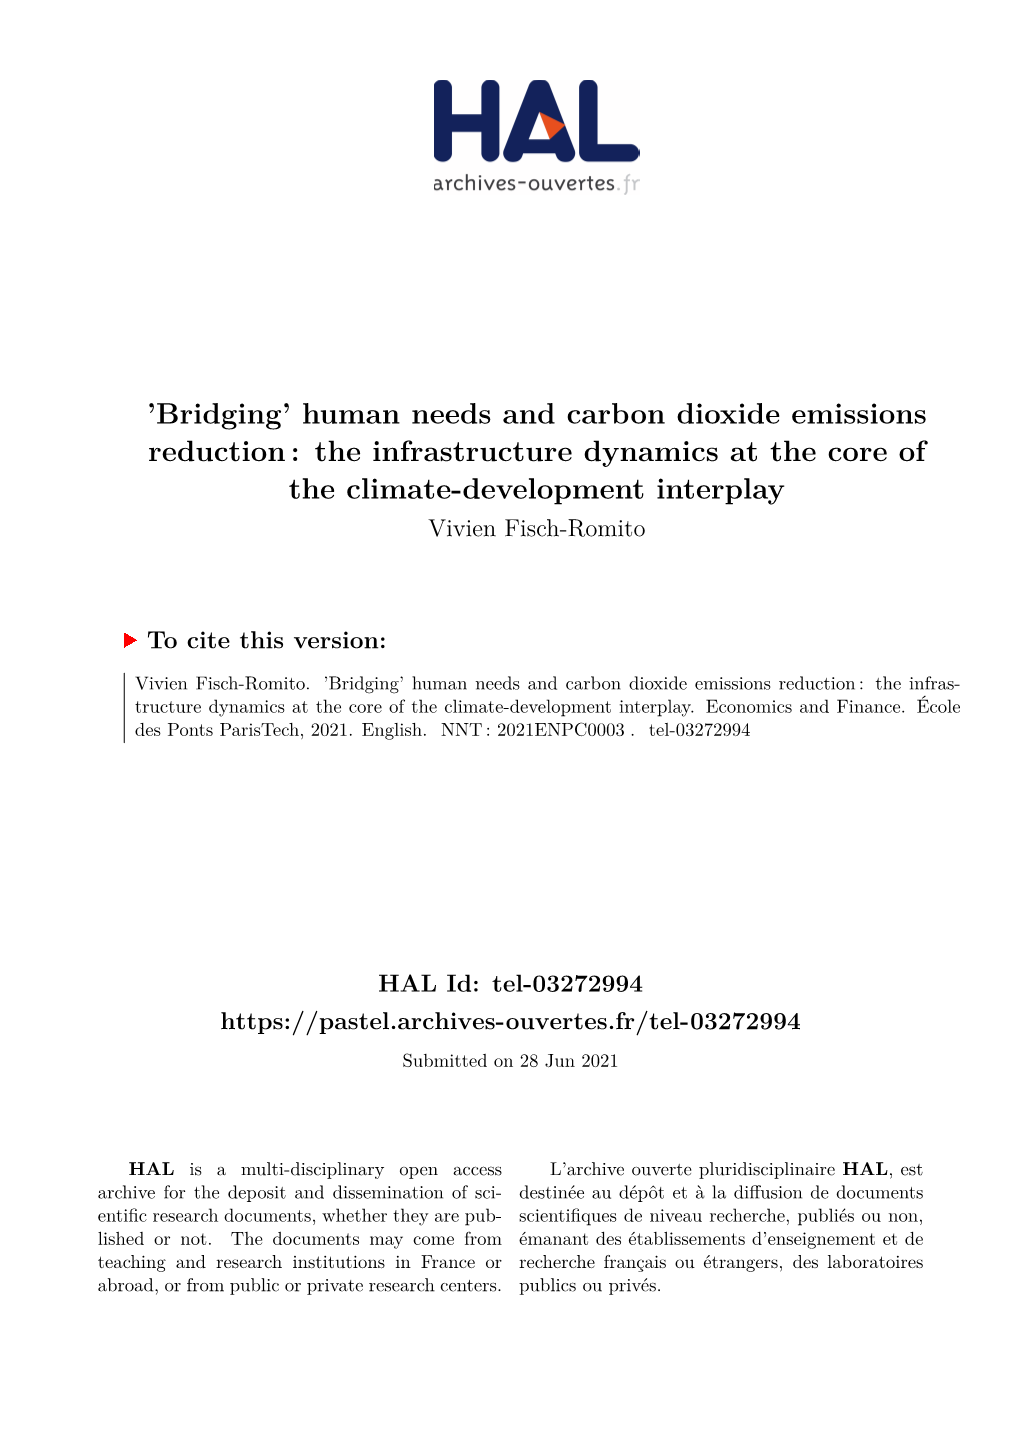 'Bridging' Human Needs and Carbon Dioxide Emissions Reduction: The